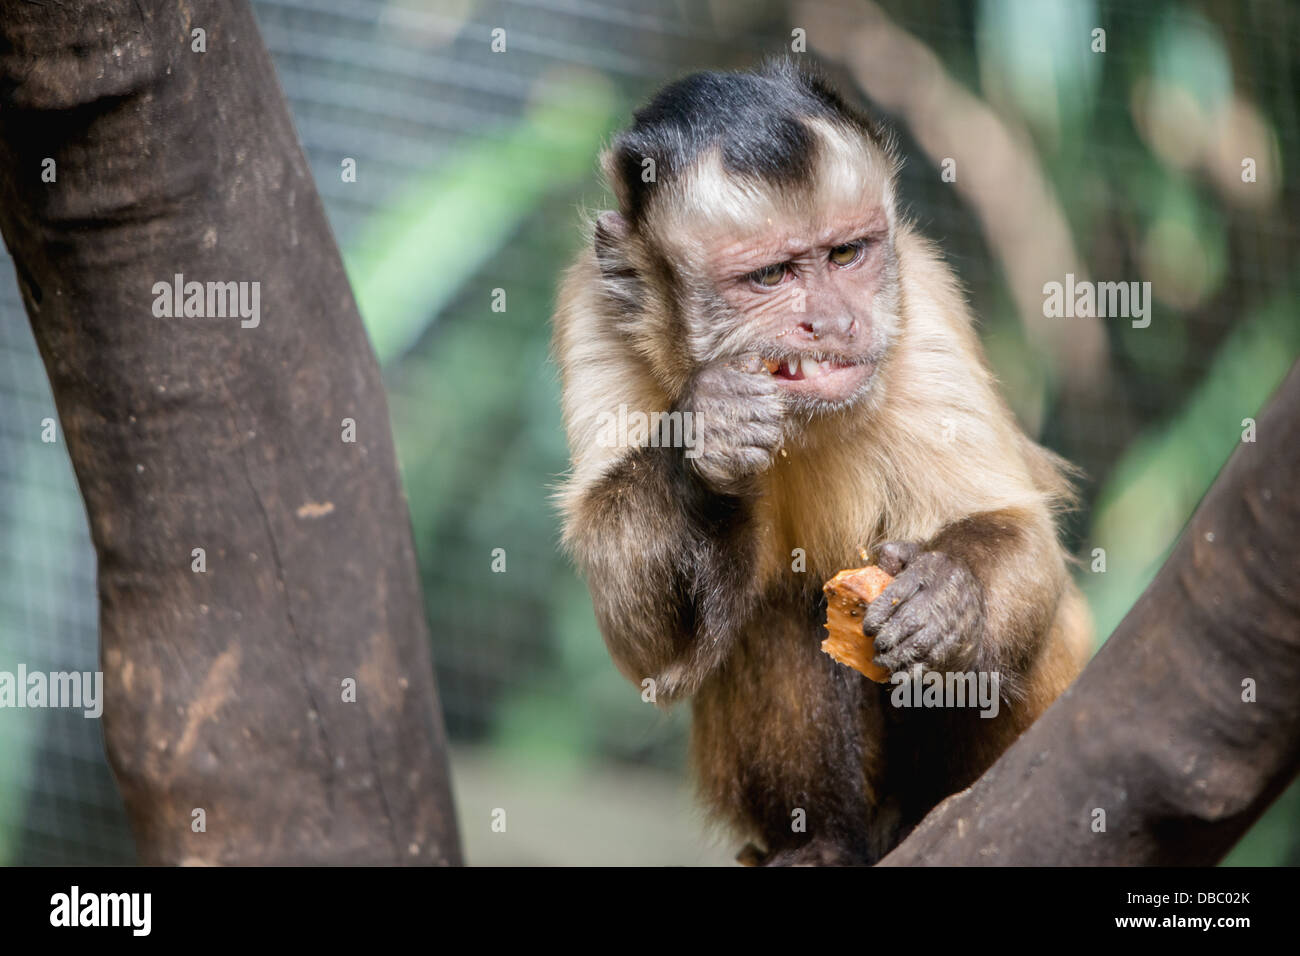 A close-up of the expressive face of a capuchin monkey eating Stock Photo